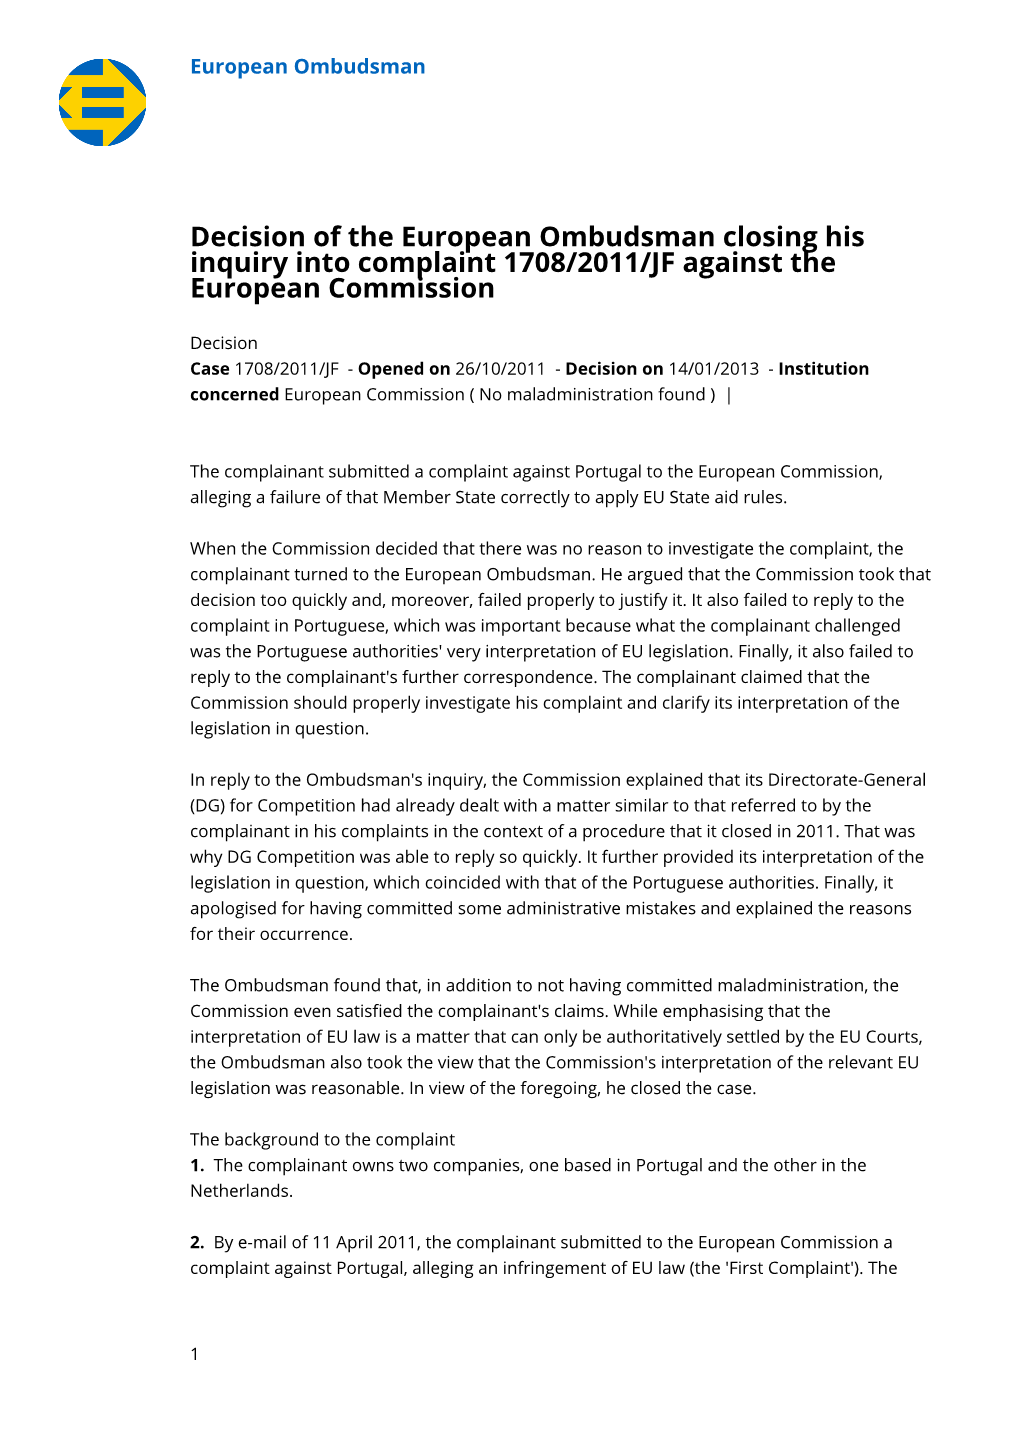 Decision of the European Ombudsman Closing His Inquiry Into Complaint 1708/2011/JF Against the European Commission